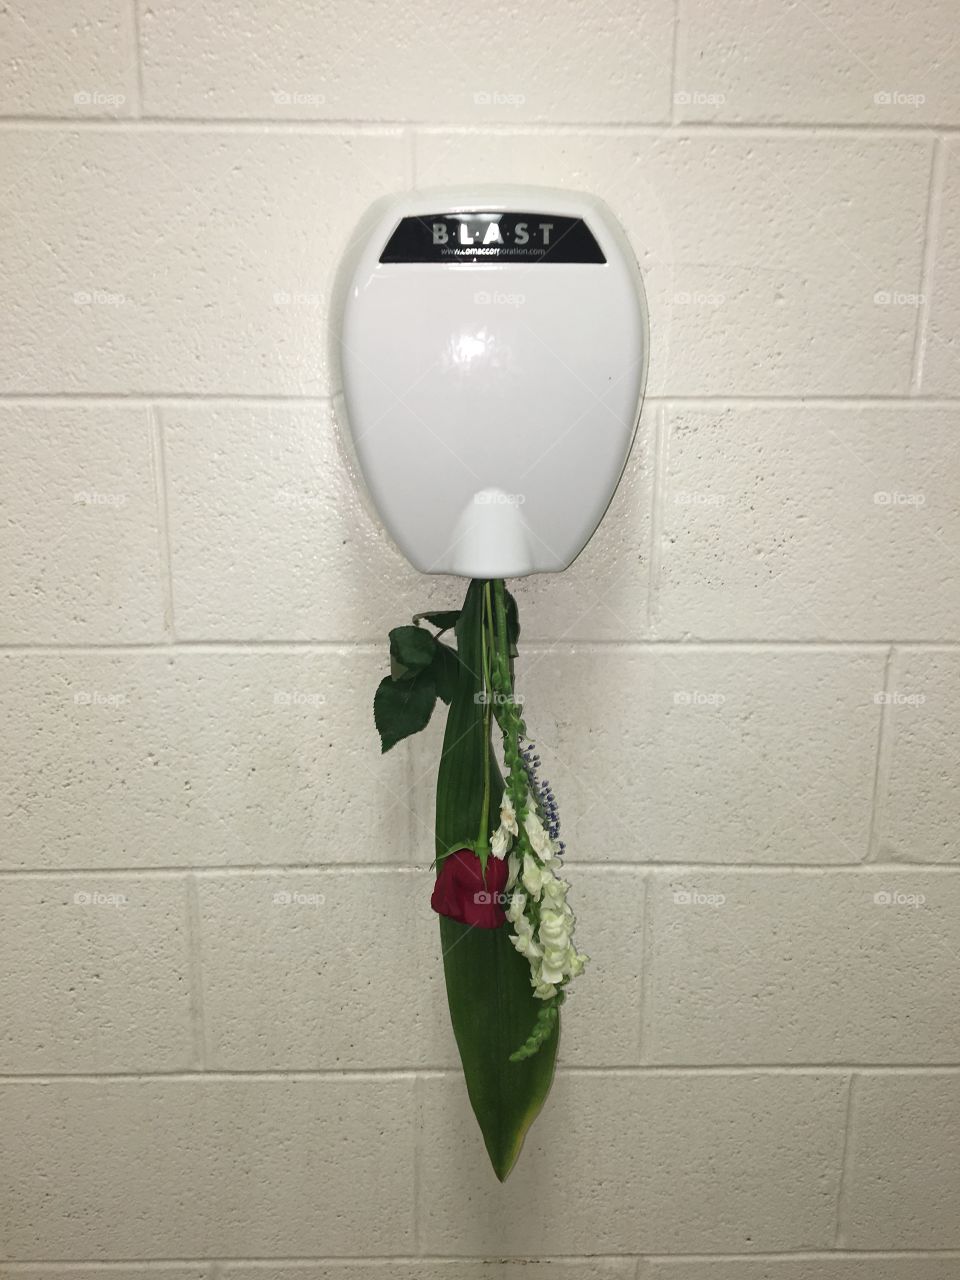 A little thing I did with some flowers in a school washroom